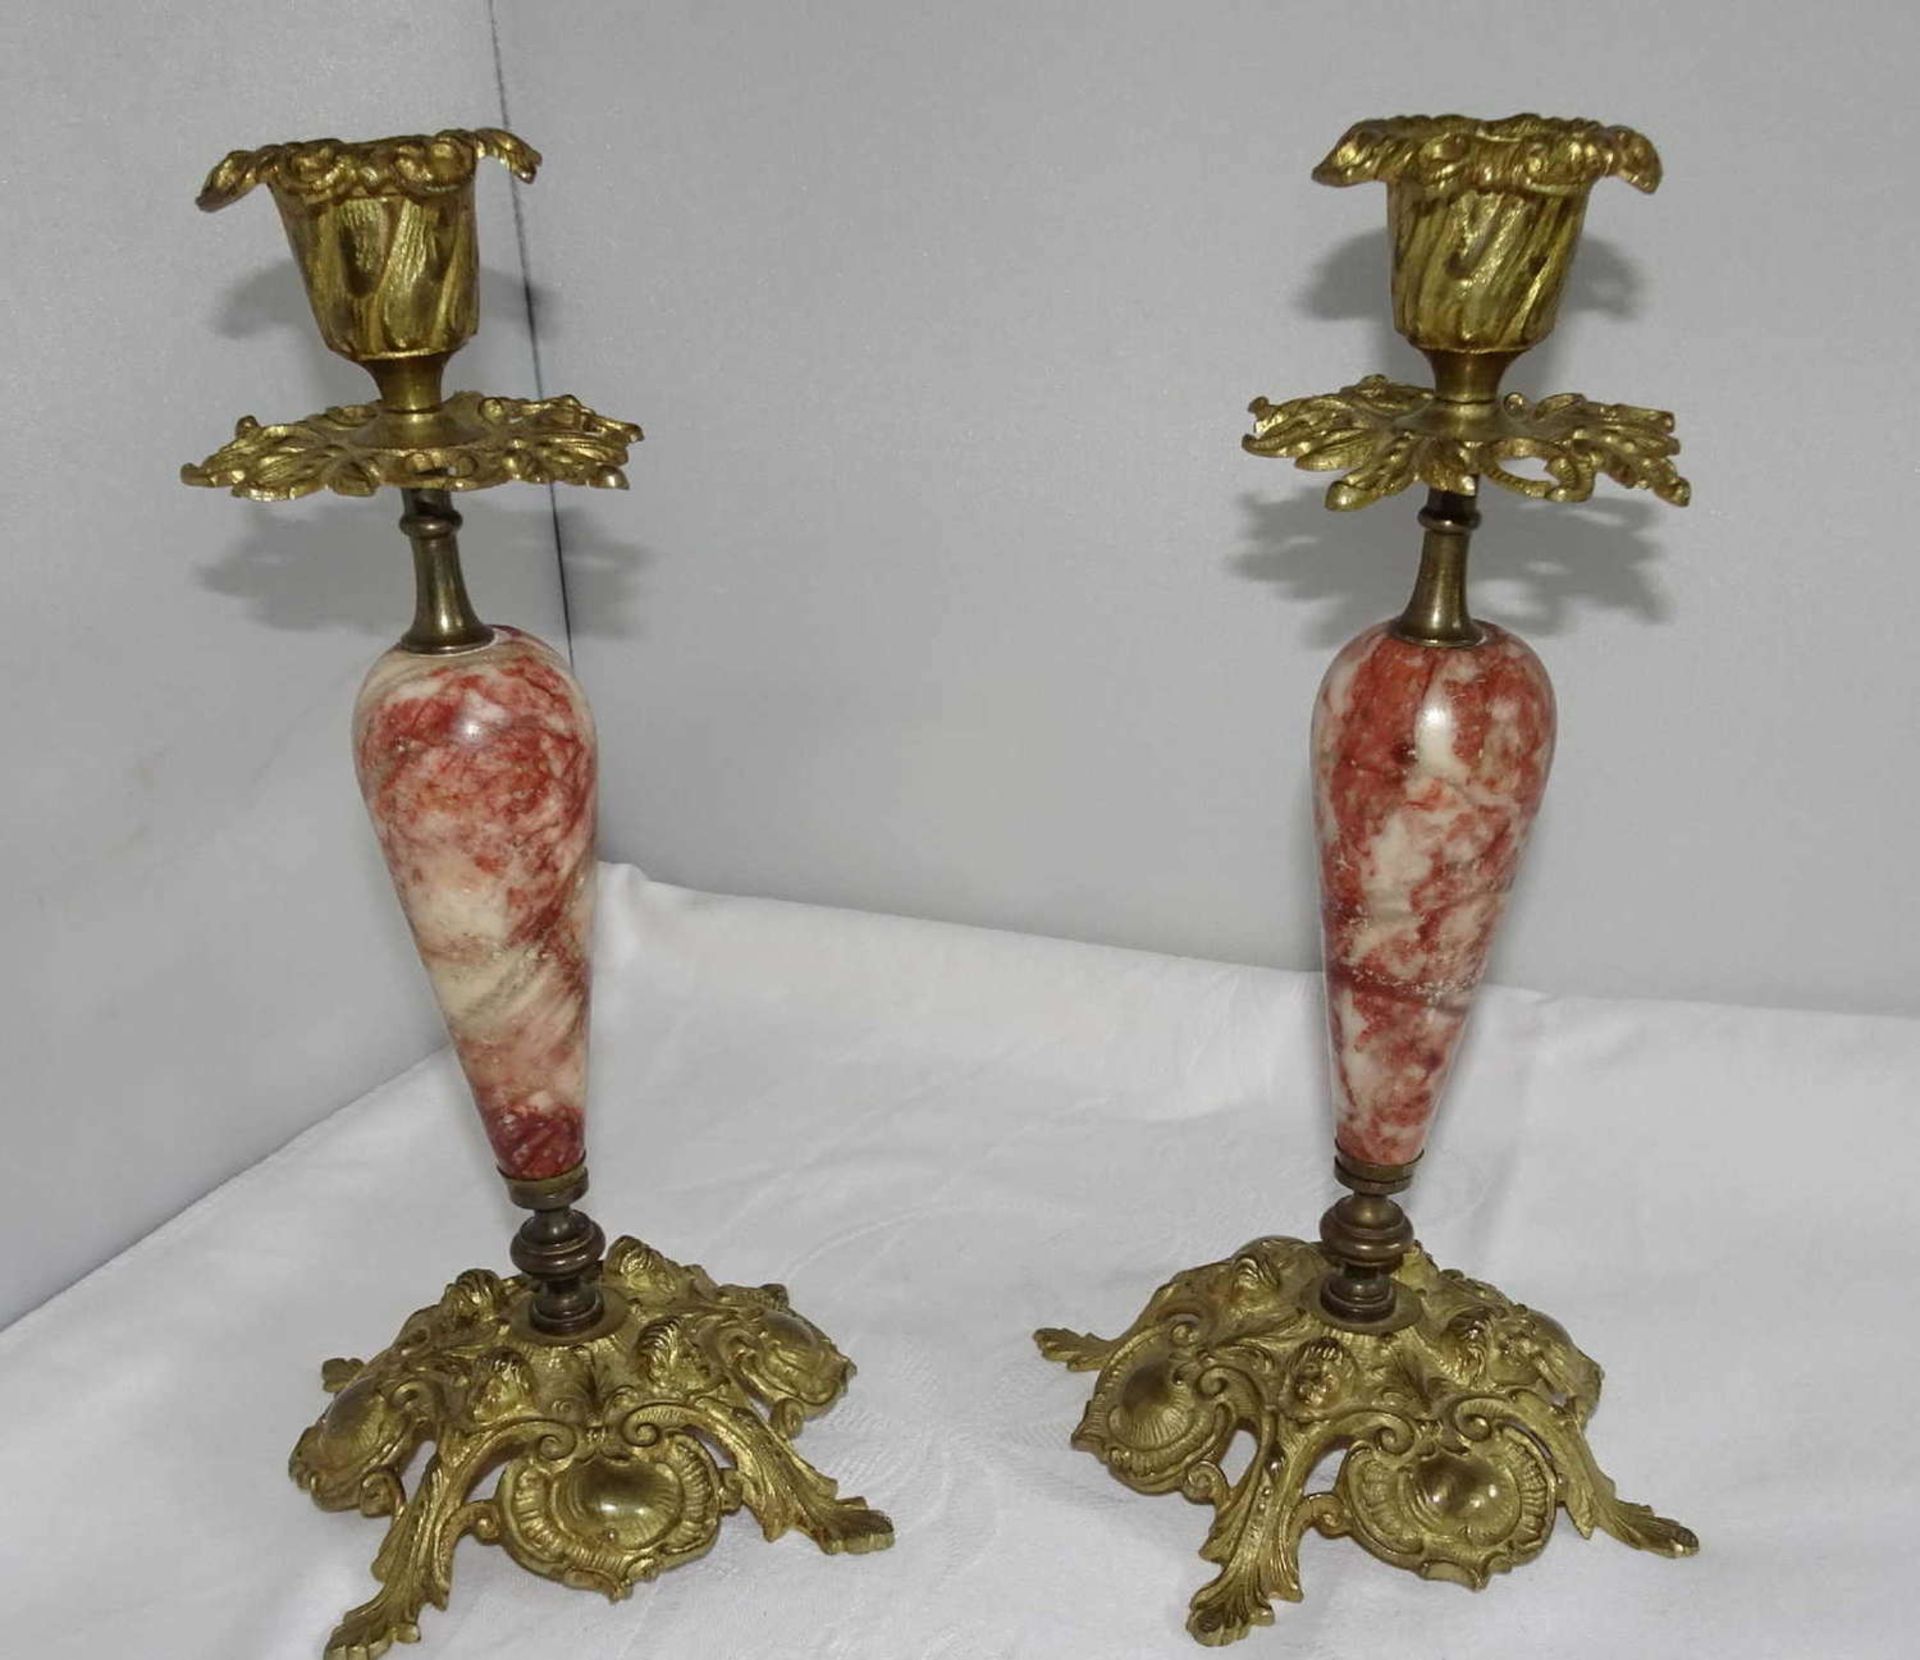 2 candle holders with marble base, bronze fire-gilt, approx. 22 cm high2 Kerzenständer mit